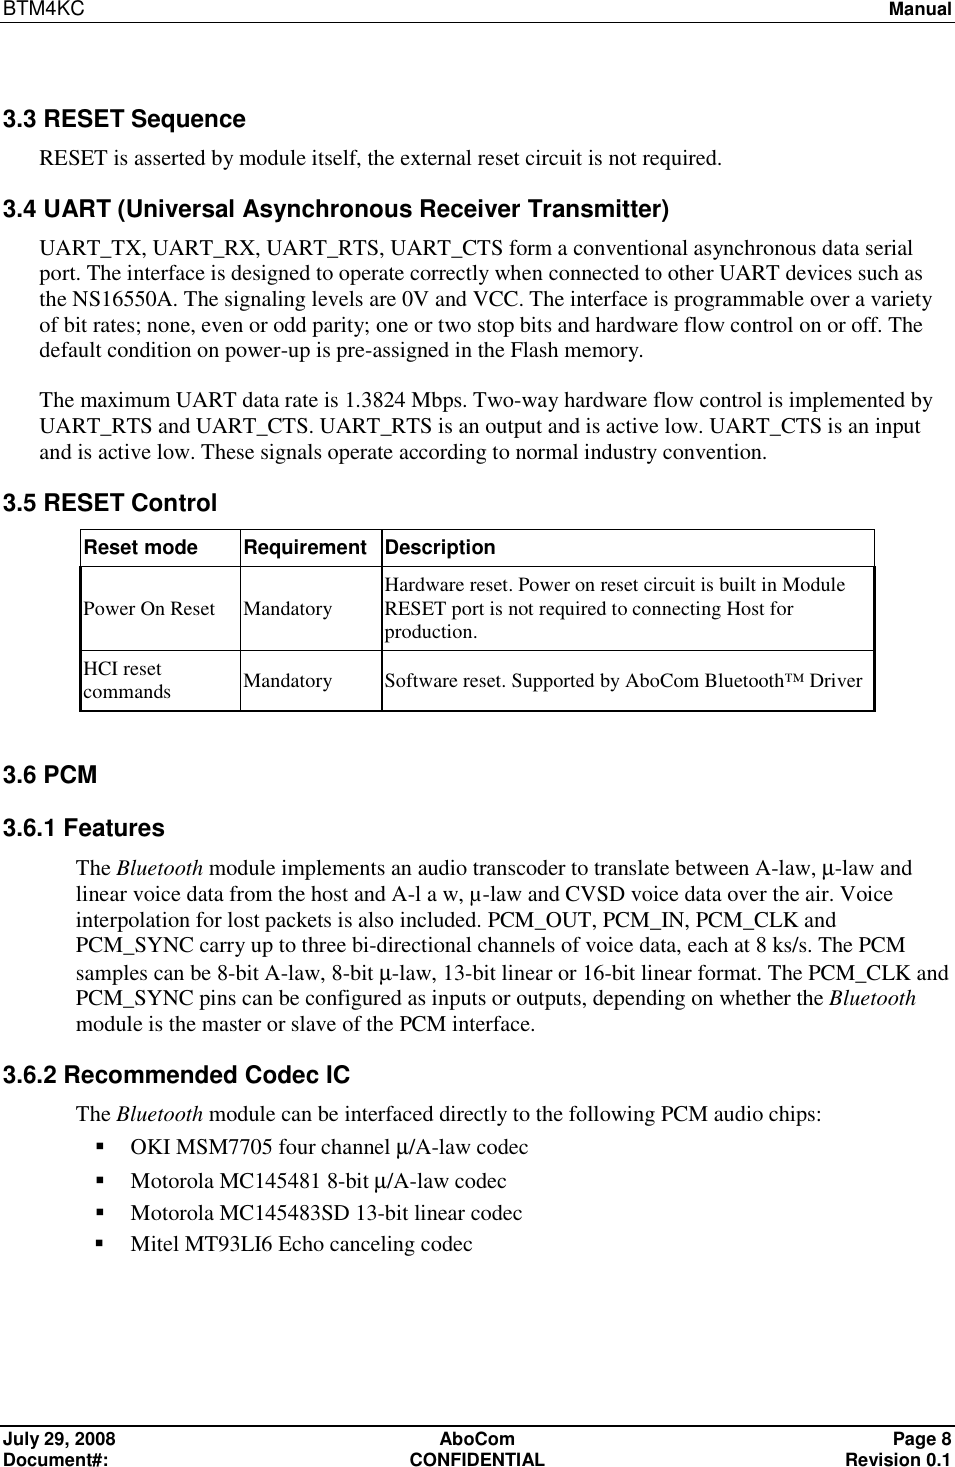 BTM4KC   Manual  July 29, 2008  AboCom  Page 8 Document#:  CONFIDENTIAL  Revision 0.1  3.3 RESET Sequence RESET is asserted by module itself, the external reset circuit is not required. 3.4 UART (Universal Asynchronous Receiver Transmitter) UART_TX, UART_RX, UART_RTS, UART_CTS form a conventional asynchronous data serial port. The interface is designed to operate correctly when connected to other UART devices such as the NS16550A. The signaling levels are 0V and VCC. The interface is programmable over a variety of bit rates; none, even or odd parity; one or two stop bits and hardware flow control on or off. The default condition on power-up is pre-assigned in the Flash memory. The maximum UART data rate is 1.3824 Mbps. Two-way hardware flow control is implemented by UART_RTS and UART_CTS. UART_RTS is an output and is active low. UART_CTS is an input and is active low. These signals operate according to normal industry convention. 3.5 RESET Control Reset mode  Requirement Description Power On Reset  Mandatory  Hardware reset. Power on reset circuit is built in Module RESET port is not required to connecting Host for production.  HCI reset commands  Mandatory  Software reset. Supported by AboCom Bluetooth™ Driver  3.6 PCM 3.6.1 Features The Bluetooth module implements an audio transcoder to translate between A-law, µ-law and linear voice data from the host and A-l a w, µ-law and CVSD voice data over the air. Voice interpolation for lost packets is also included. PCM_OUT, PCM_IN, PCM_CLK and PCM_SYNC carry up to three bi-directional channels of voice data, each at 8 ks/s. The PCM samples can be 8-bit A-law, 8-bit µ-law, 13-bit linear or 16-bit linear format. The PCM_CLK and PCM_SYNC pins can be configured as inputs or outputs, depending on whether the Bluetooth module is the master or slave of the PCM interface.  3.6.2 Recommended Codec IC The Bluetooth module can be interfaced directly to the following PCM audio chips:  OKI MSM7705 four channel µ/A-law codec  Motorola MC145481 8-bit µ/A-law codec  Motorola MC145483SD 13-bit linear codec  Mitel MT93LI6 Echo canceling codec    